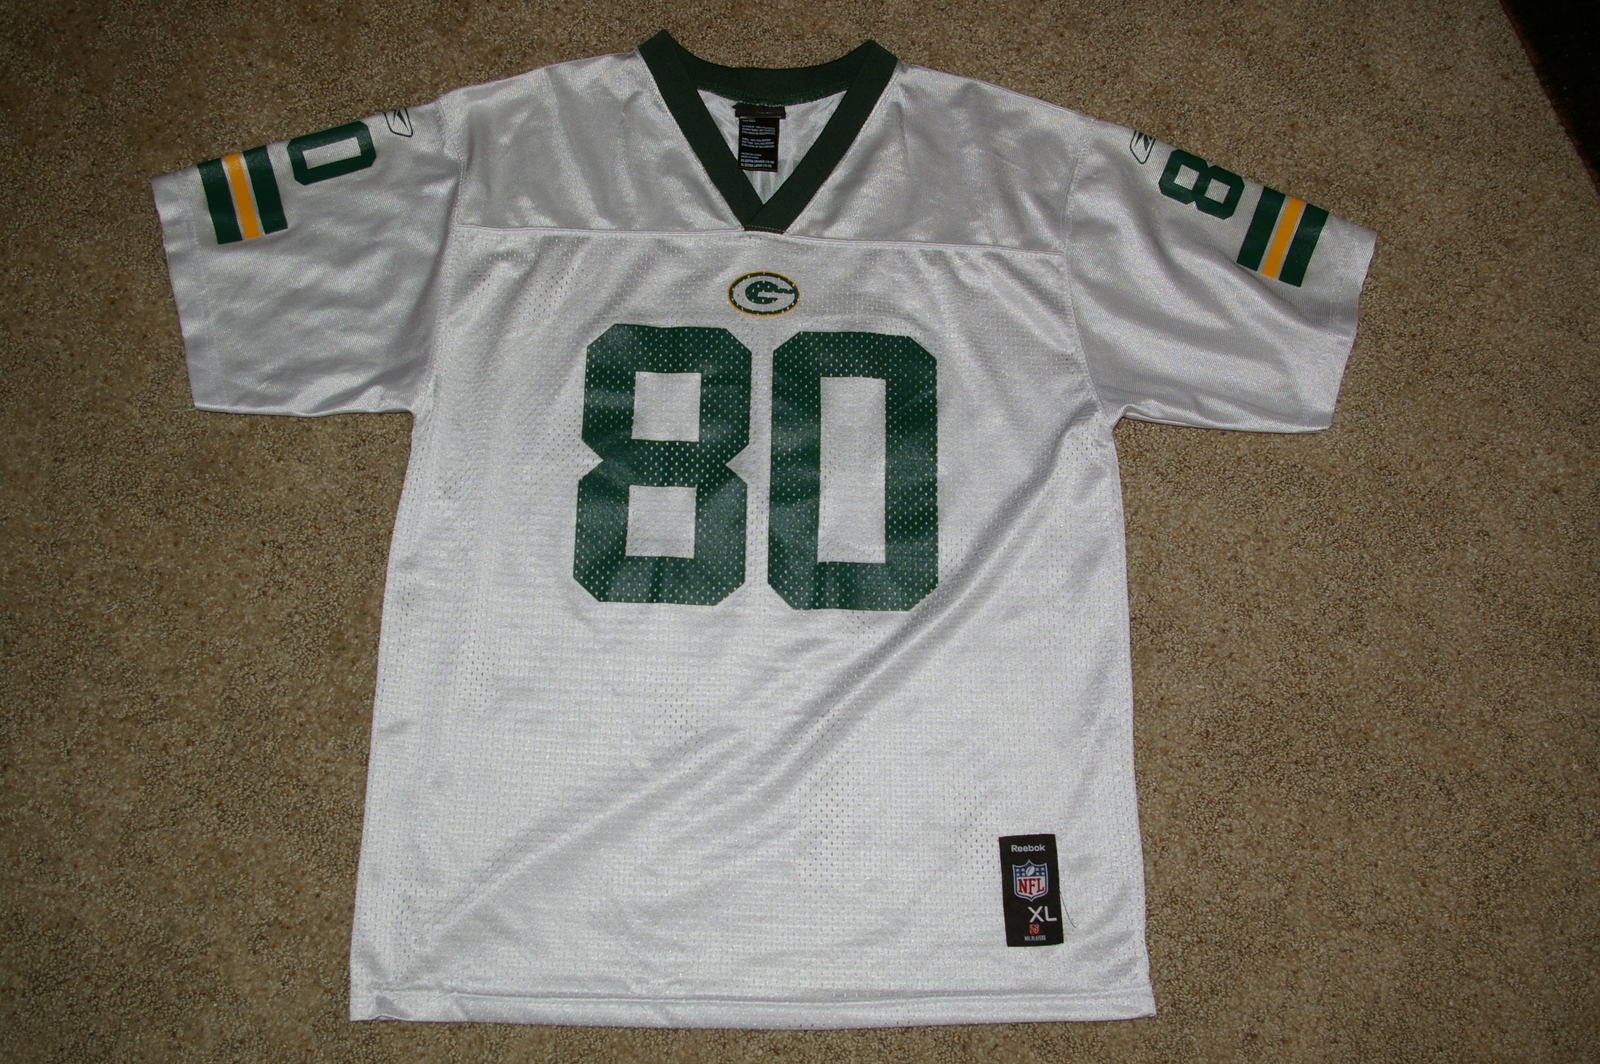 Primary image for Reebok Team Apparel Donald Driver Packers Away White 80 Jersey Size XL (18-20)